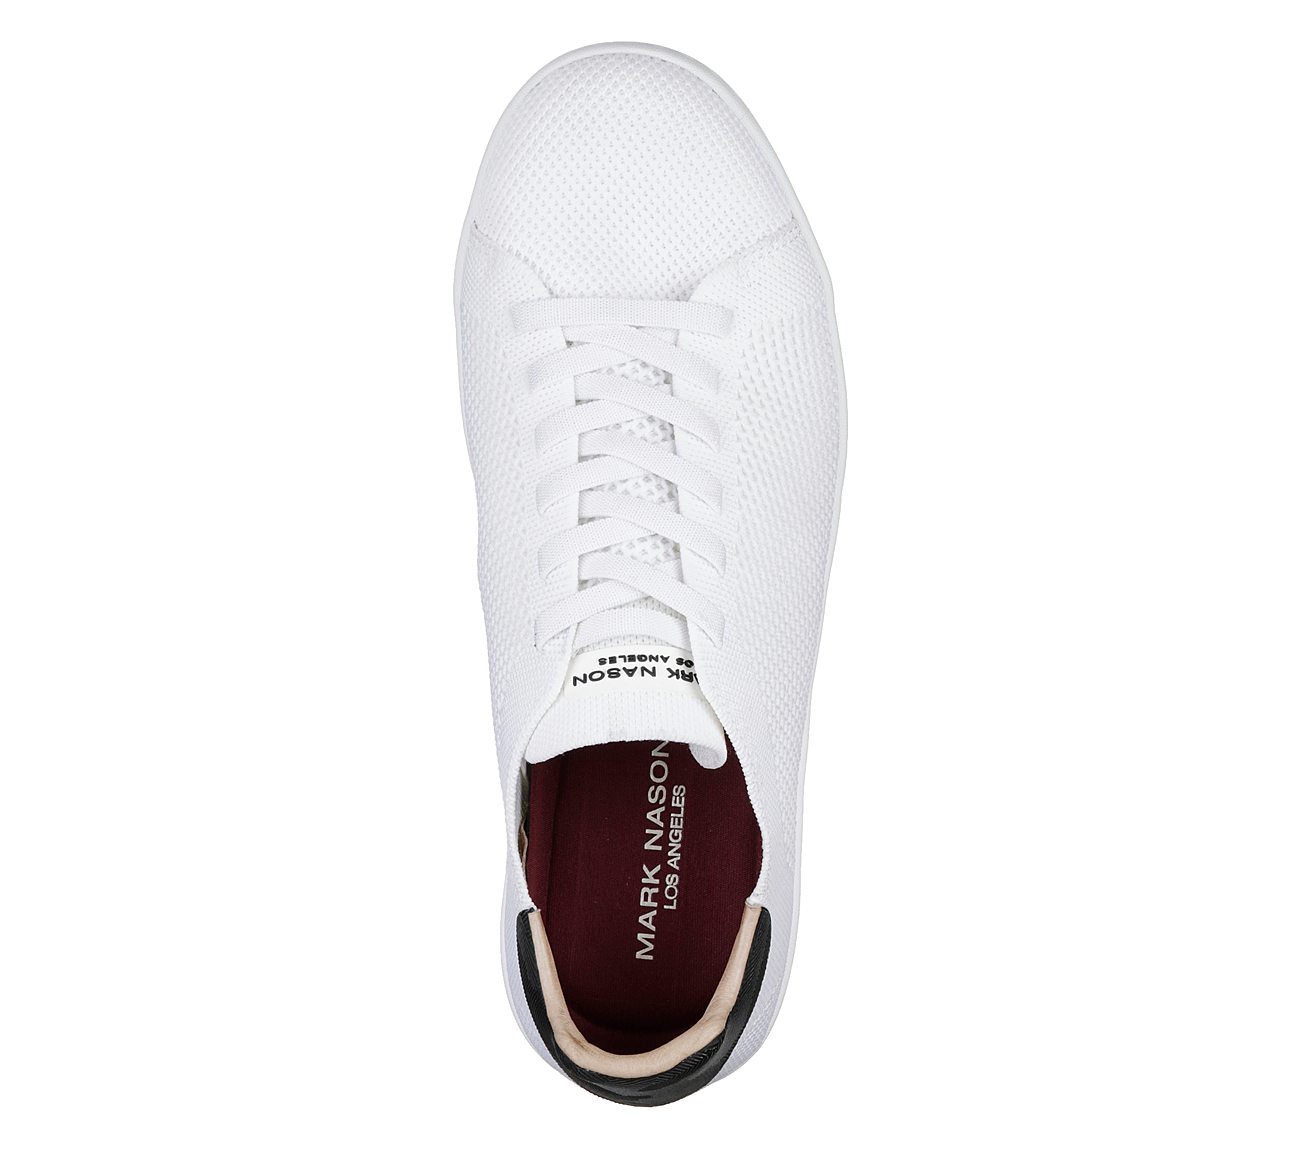 CLASSIC CUP - BRYSON, WHITE BLACK Footwear Top View